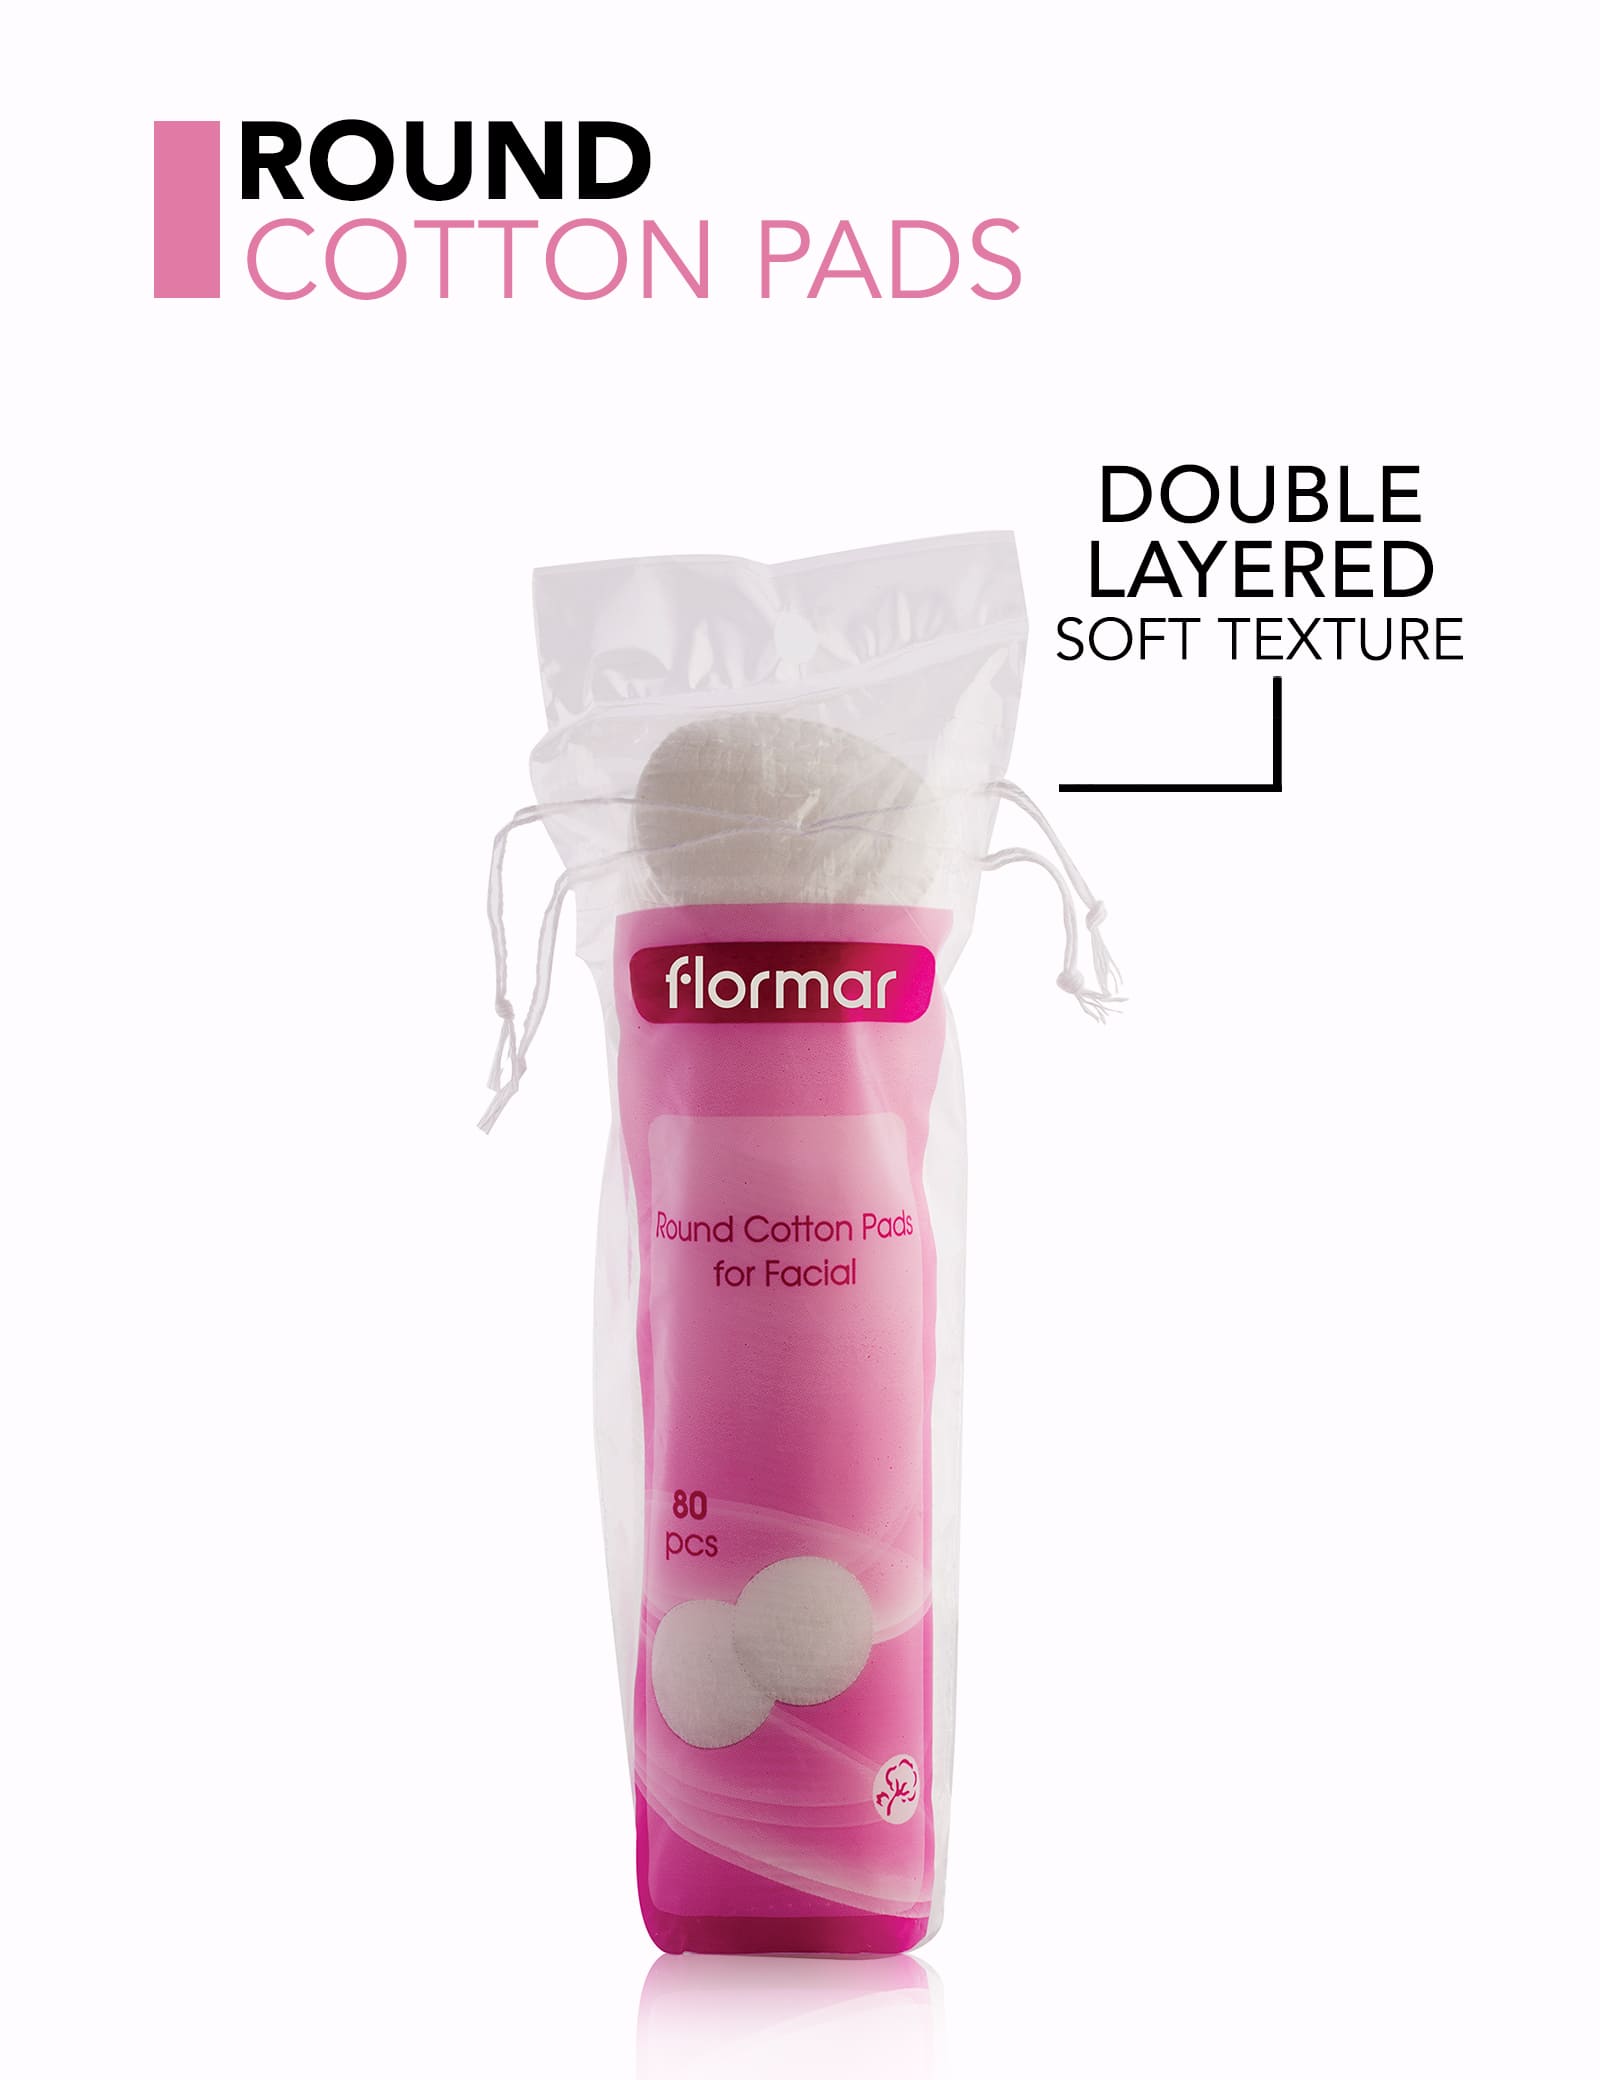 Flormar Round Cotton Pads For Facial